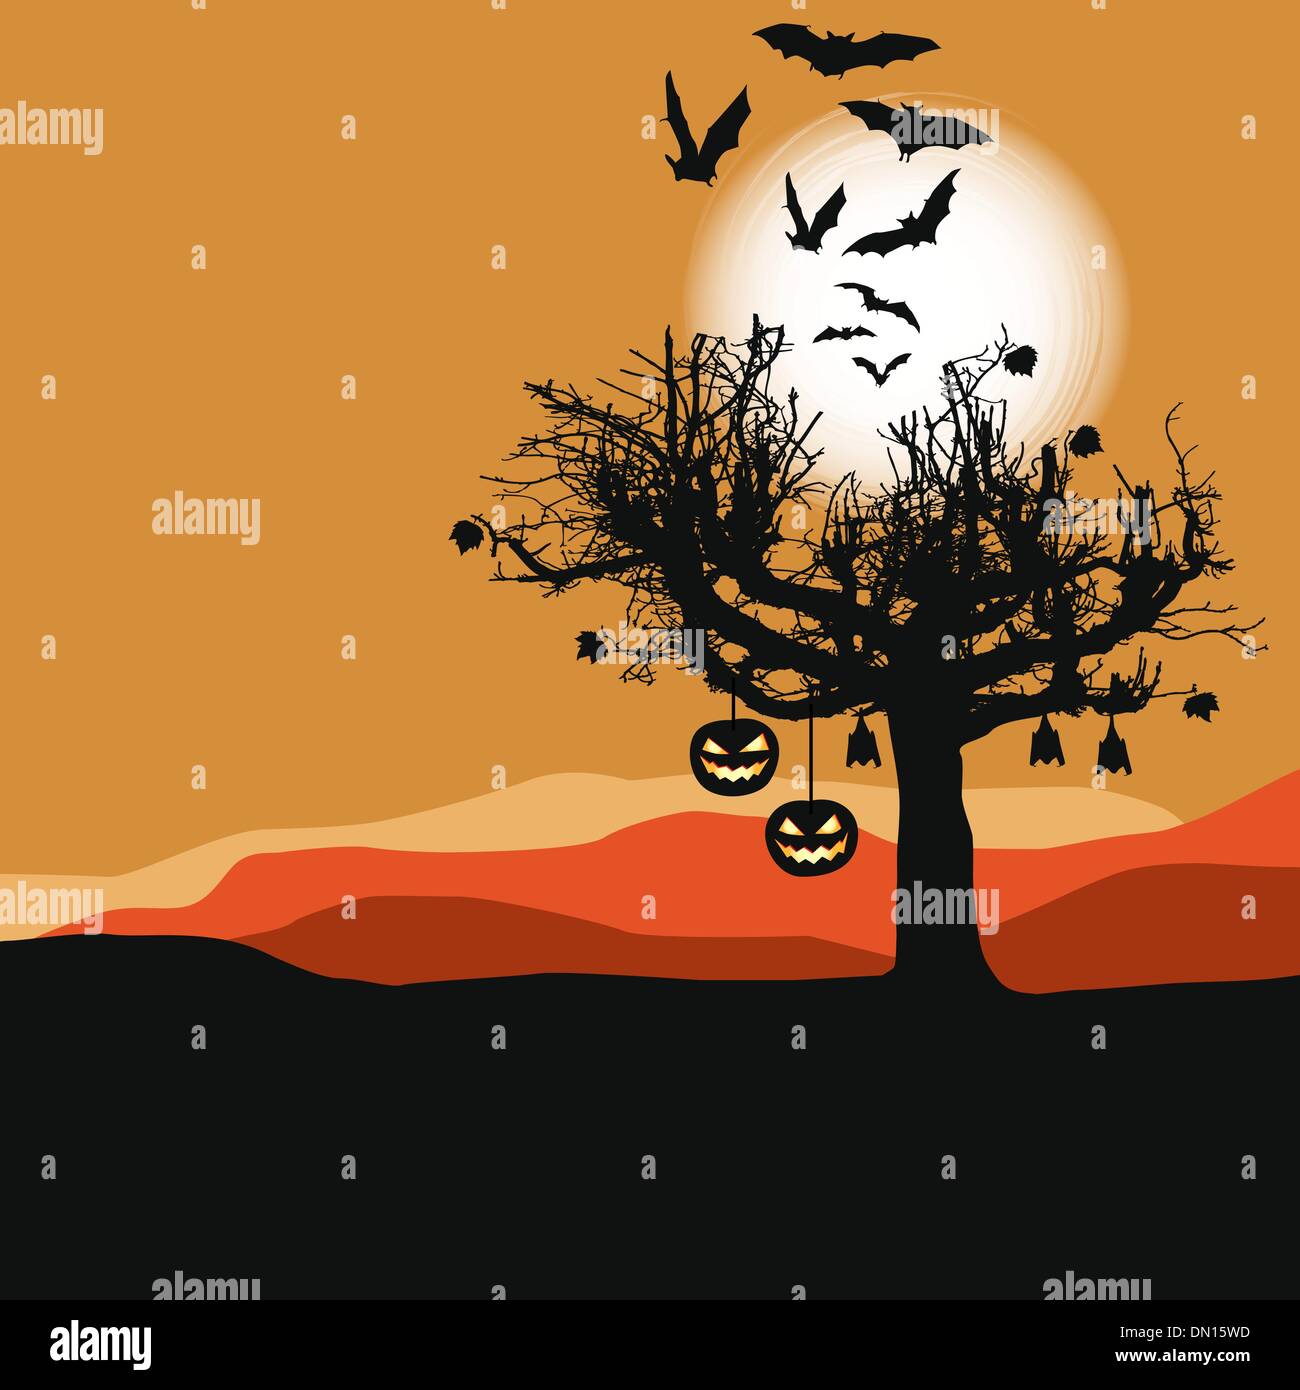 Halloween background - scary tree in full moon Stock Vector